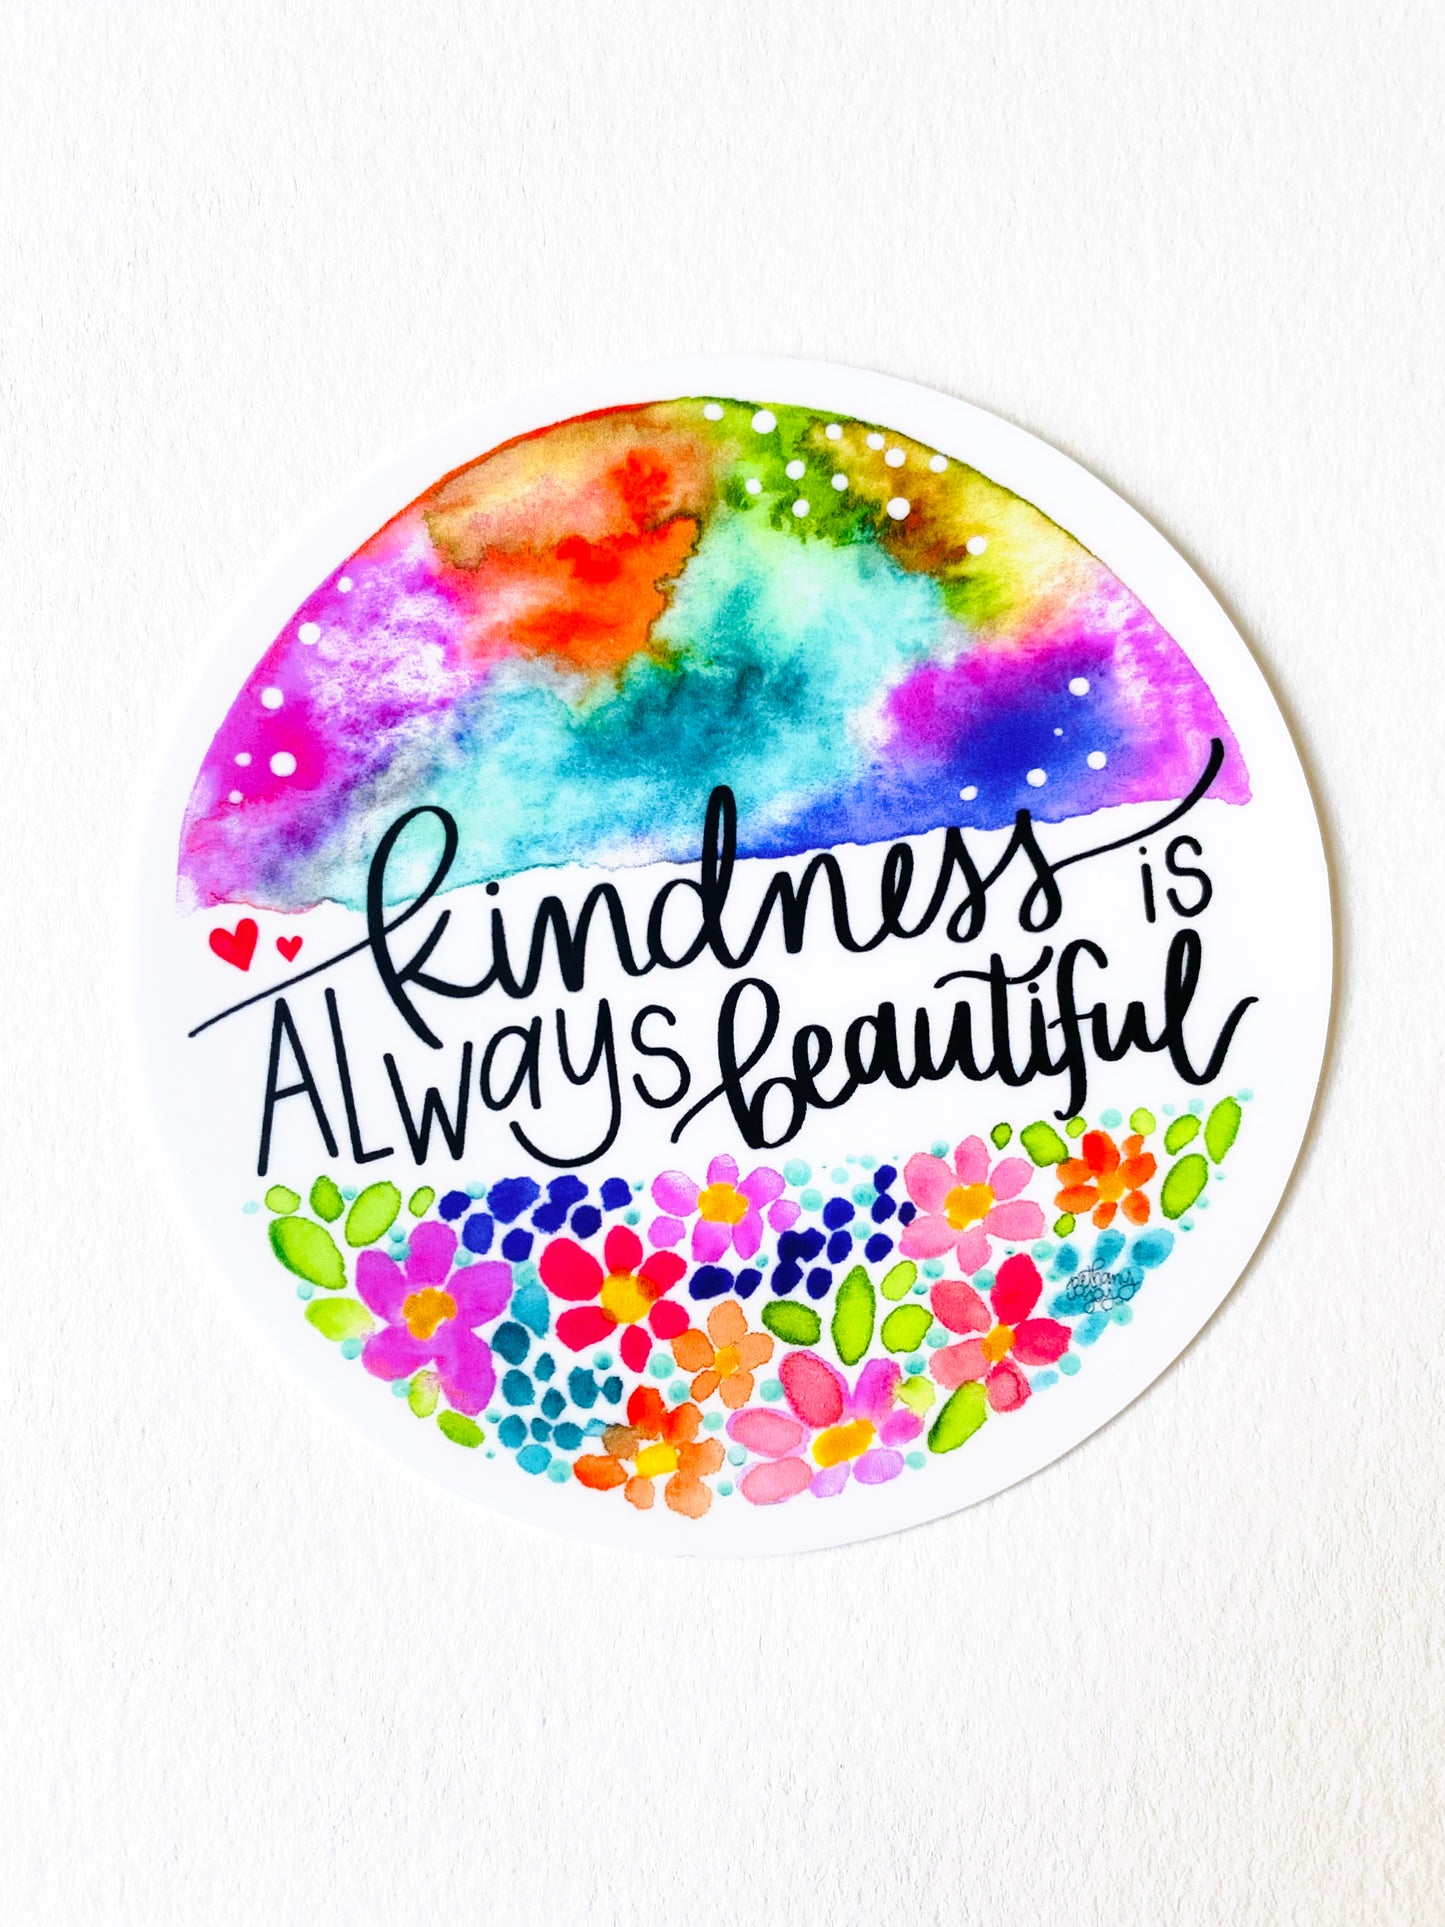 Colorful Kindness Vinyl Sticker - January 2023 Sticker of the Month